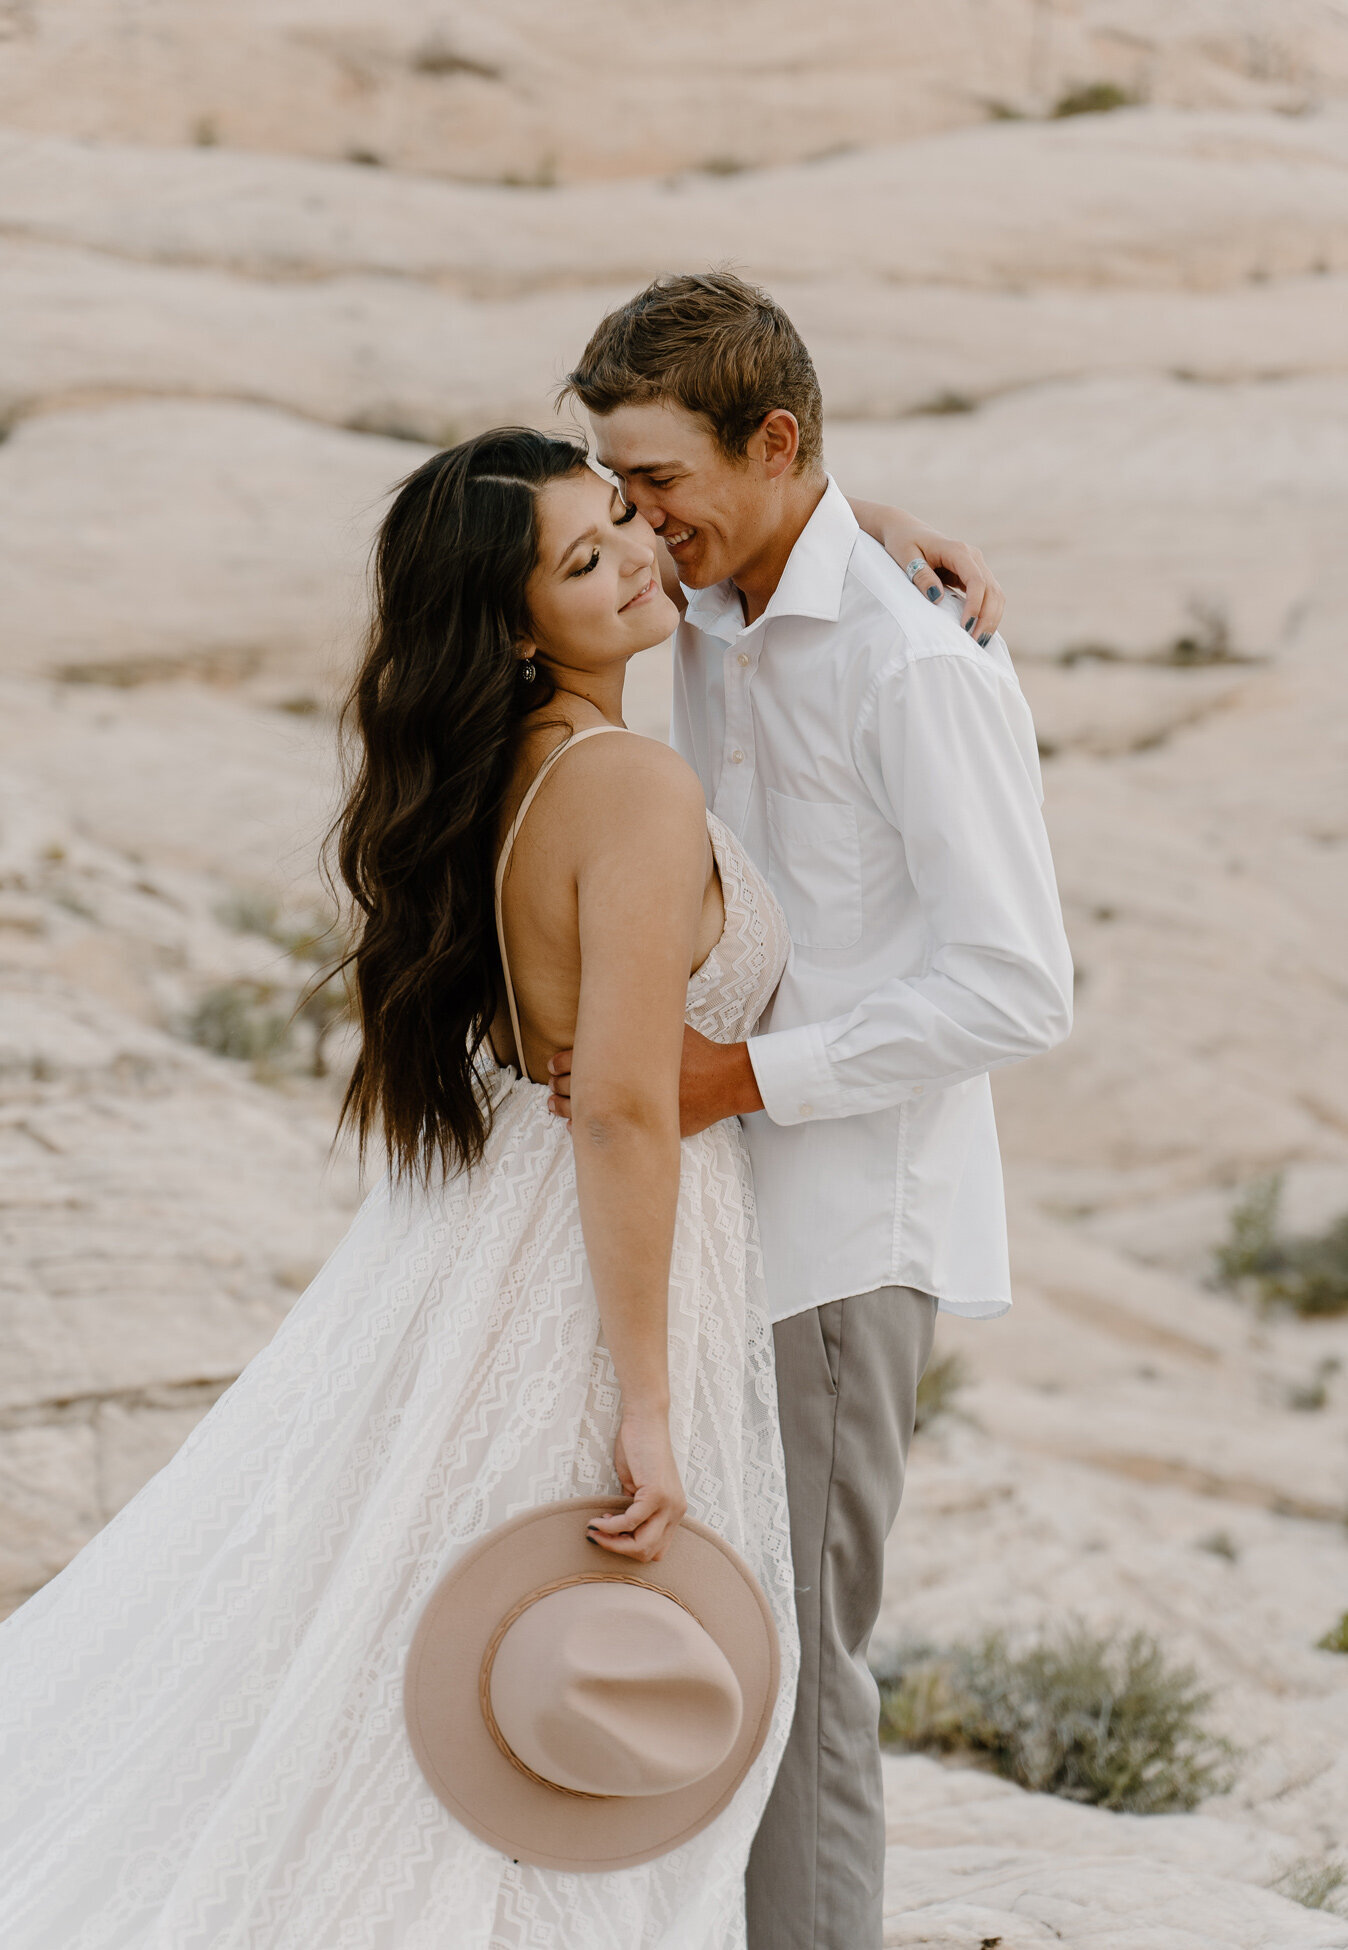 Sunrise elopement photography of a young couple in St. George, Utah